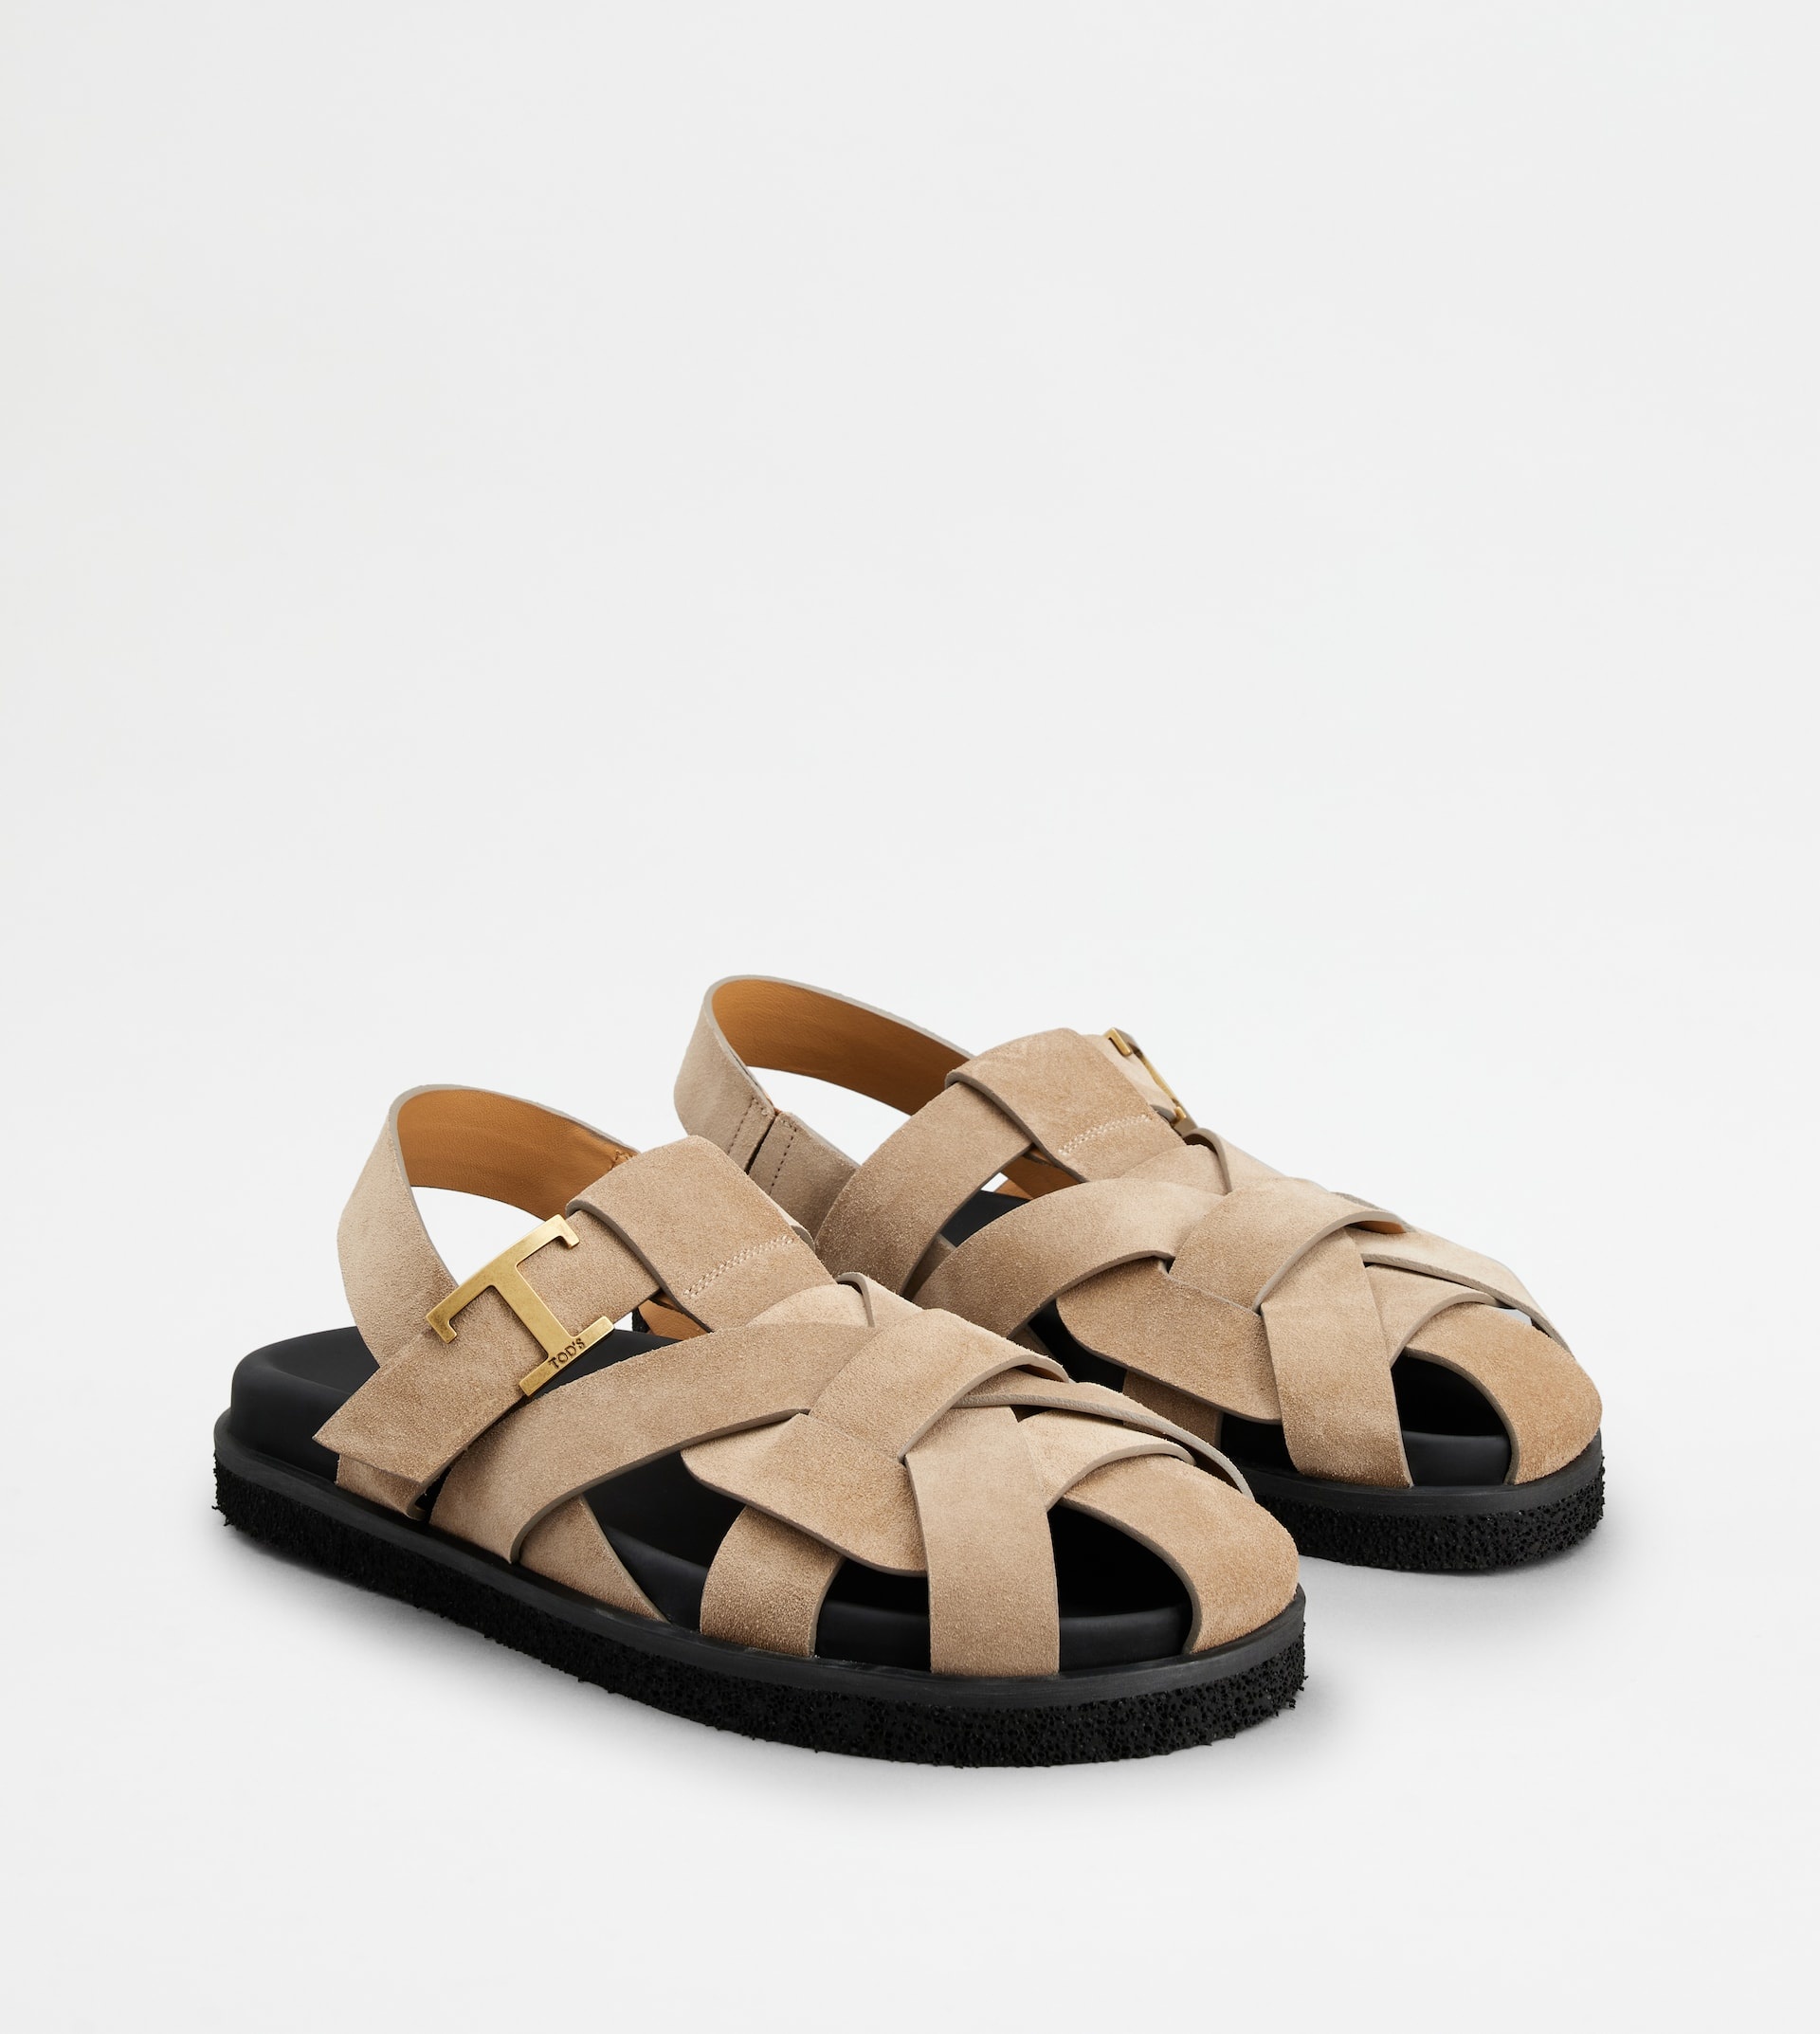 T TIMELESS SANDALS IN SUEDE - BROWN - 3